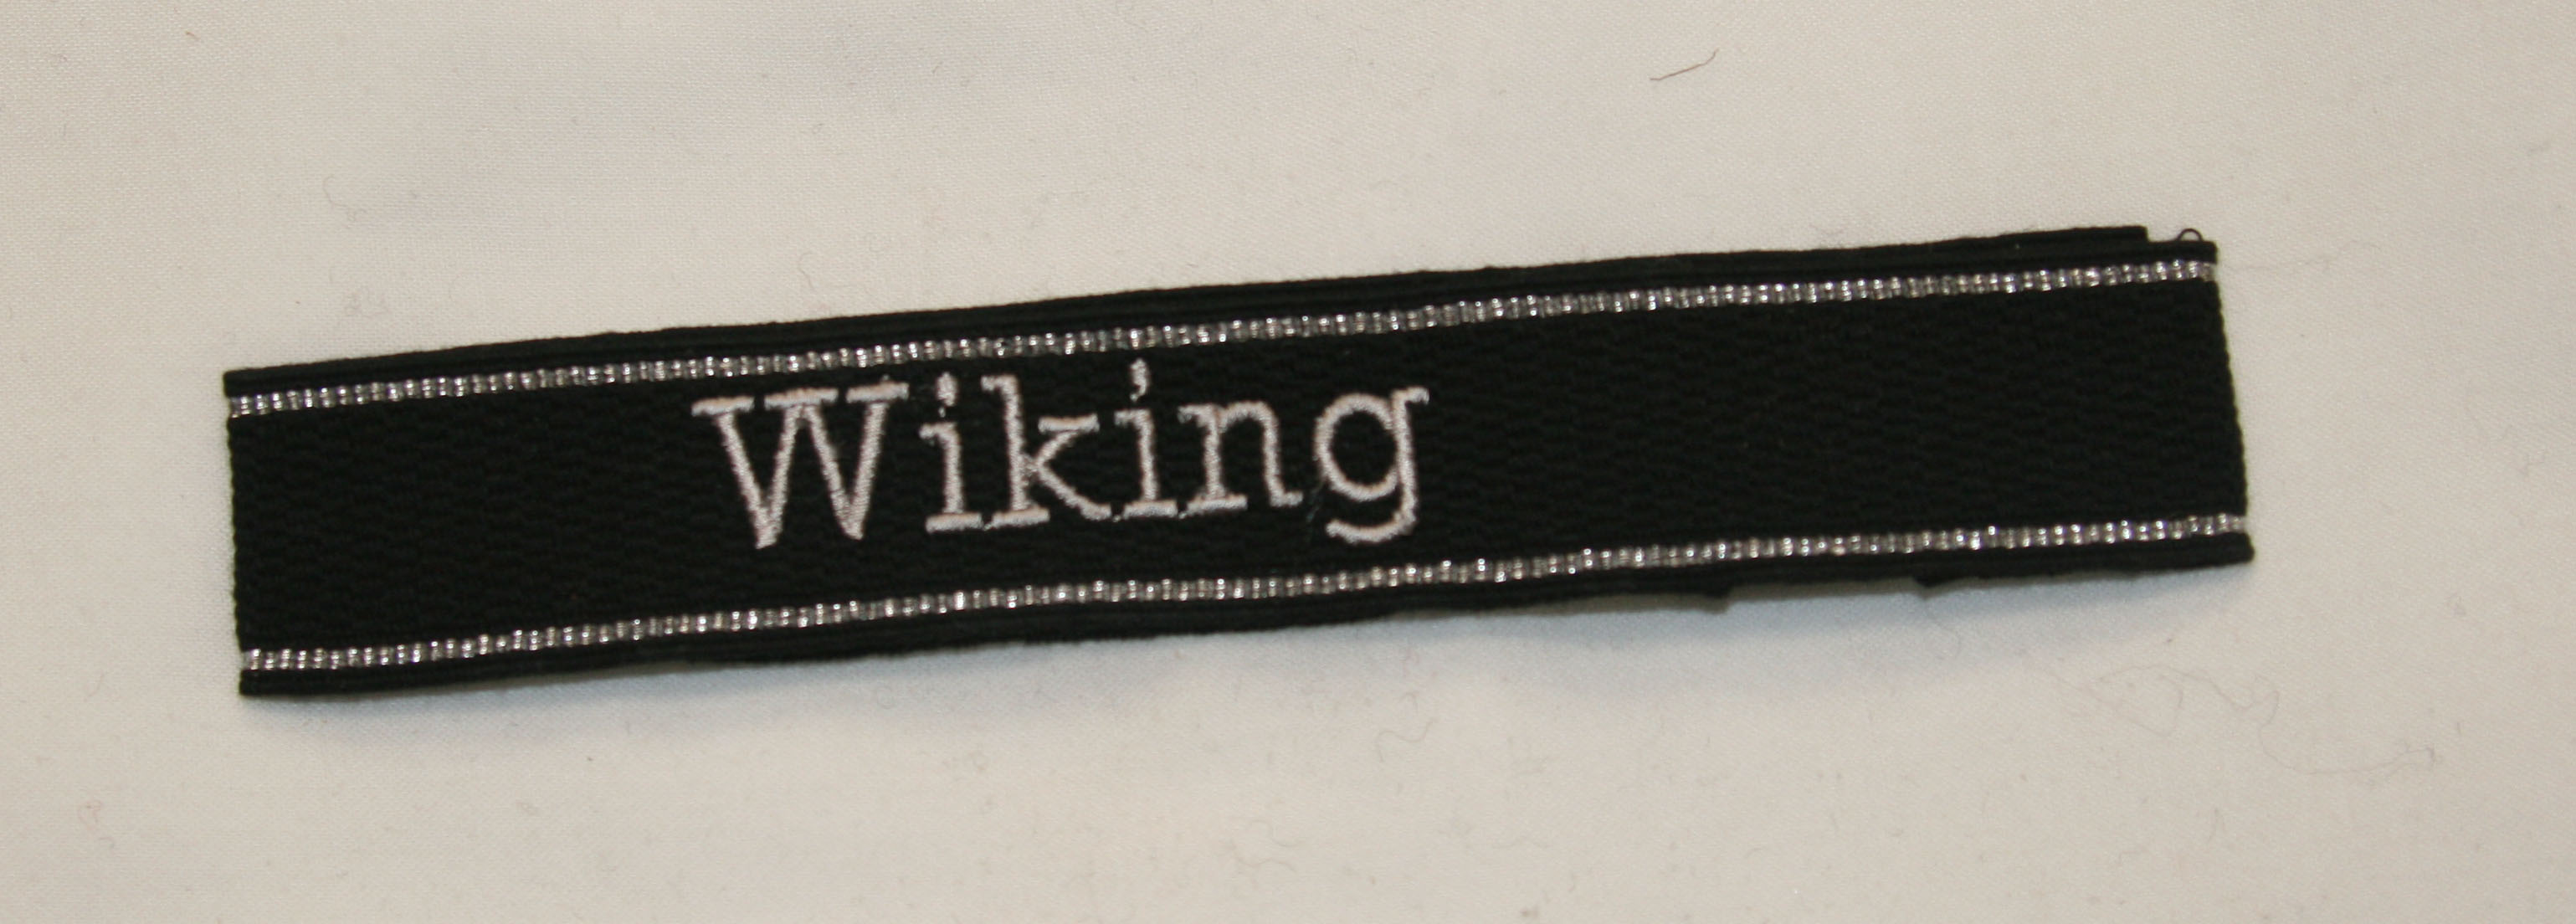 Waffen SS Divisional Cuff Title, Wiking embroidered